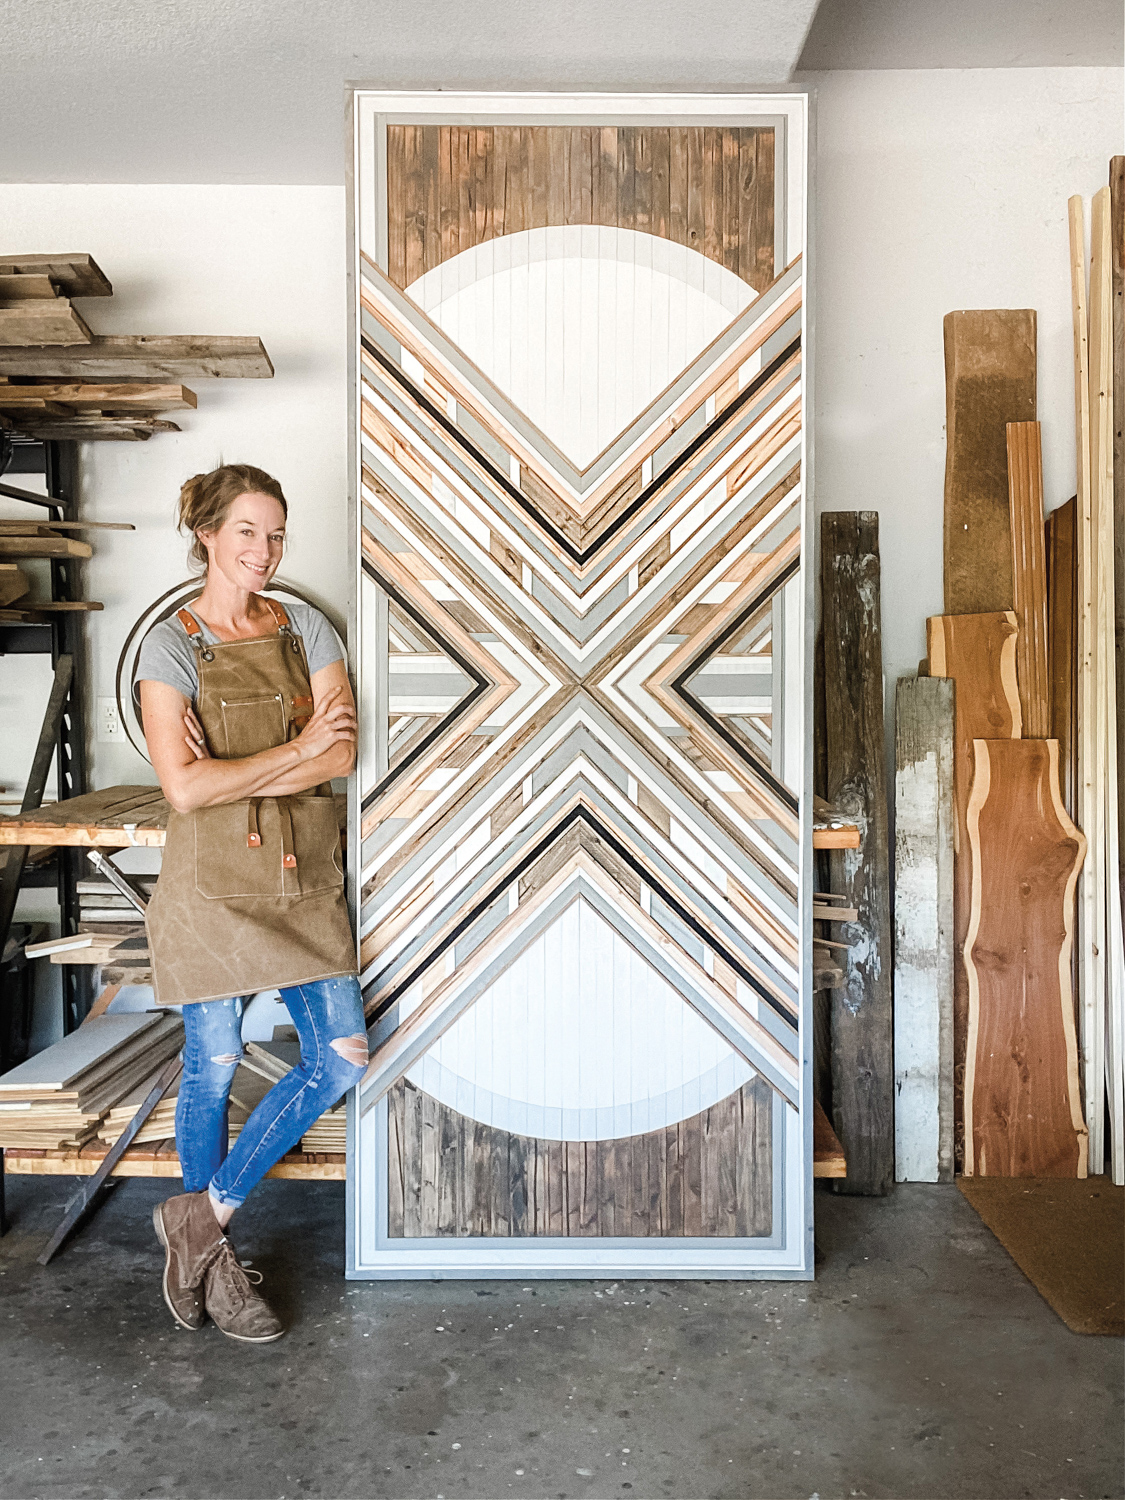 Ryan Renner leans against a floor-to-ceiling wood mosaic with her arms and ankles crossed